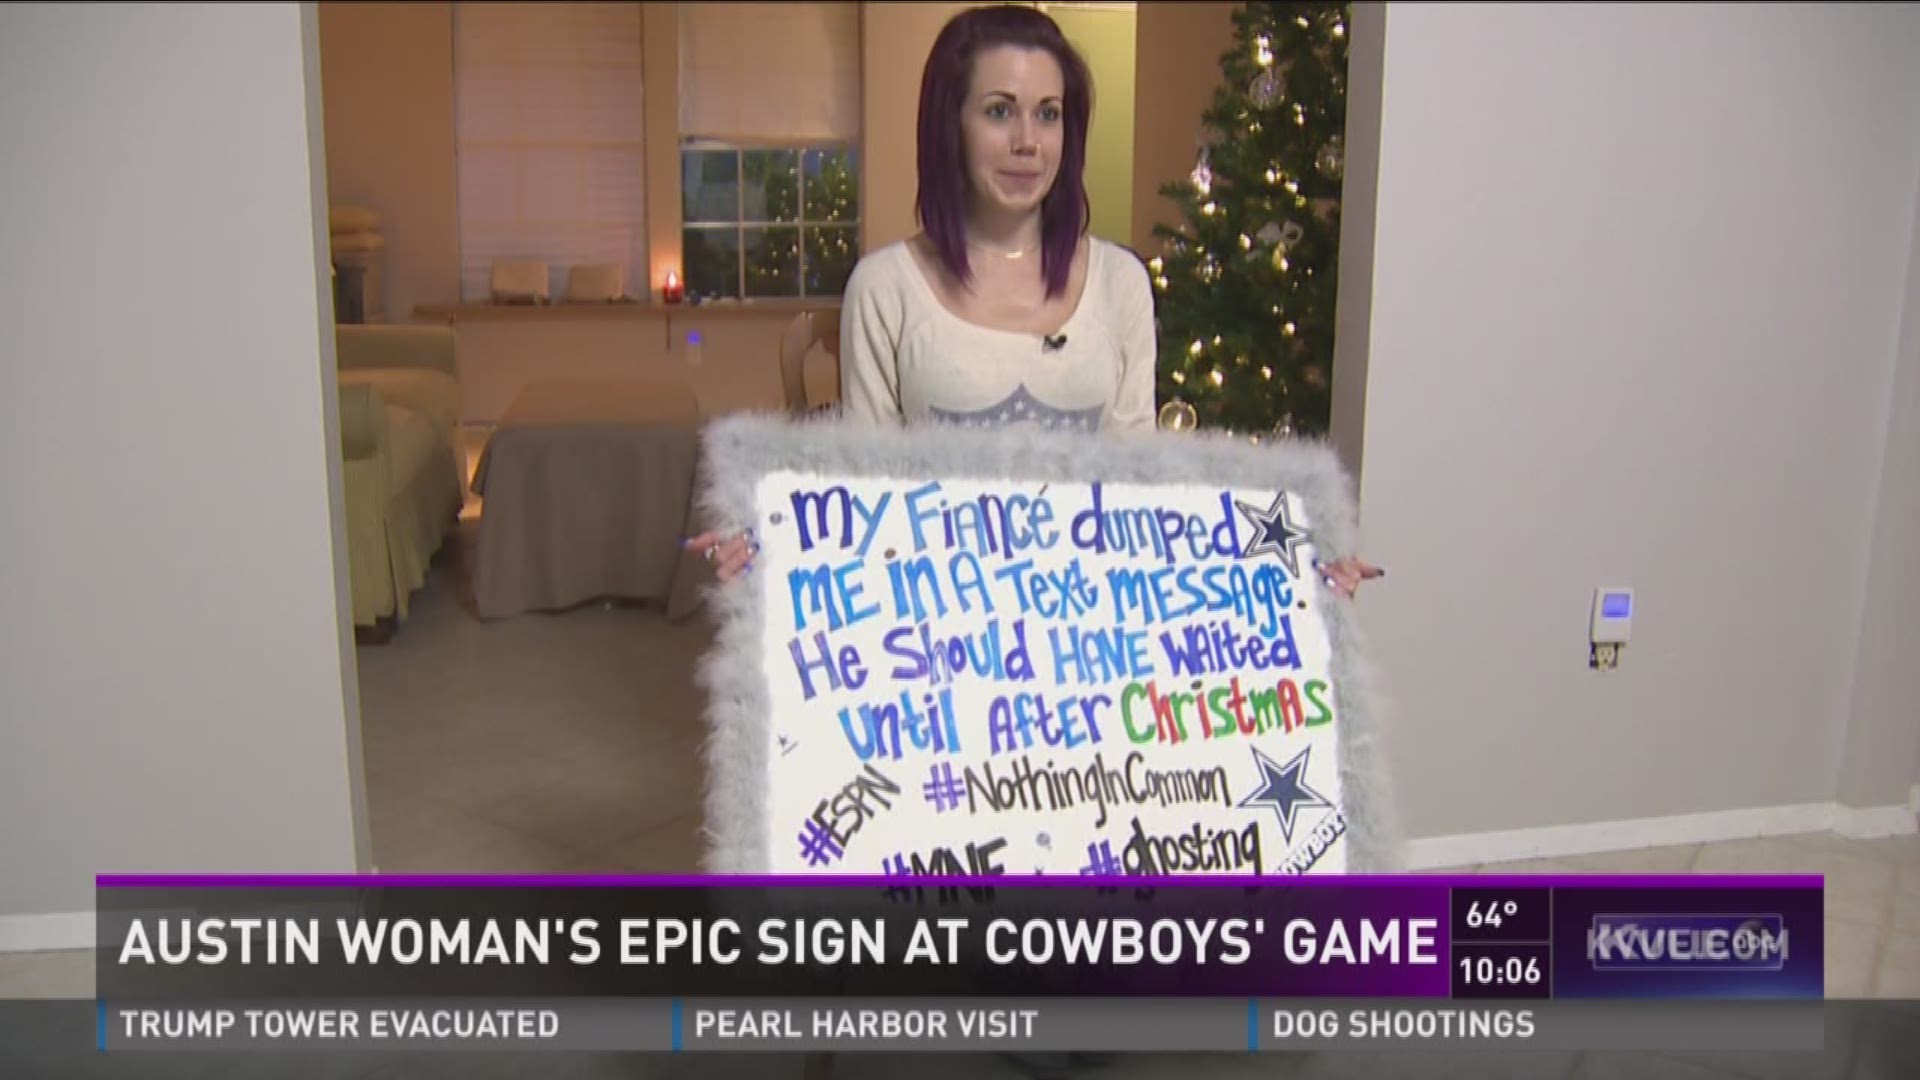 Austin woman's epic sign at cowboys' game